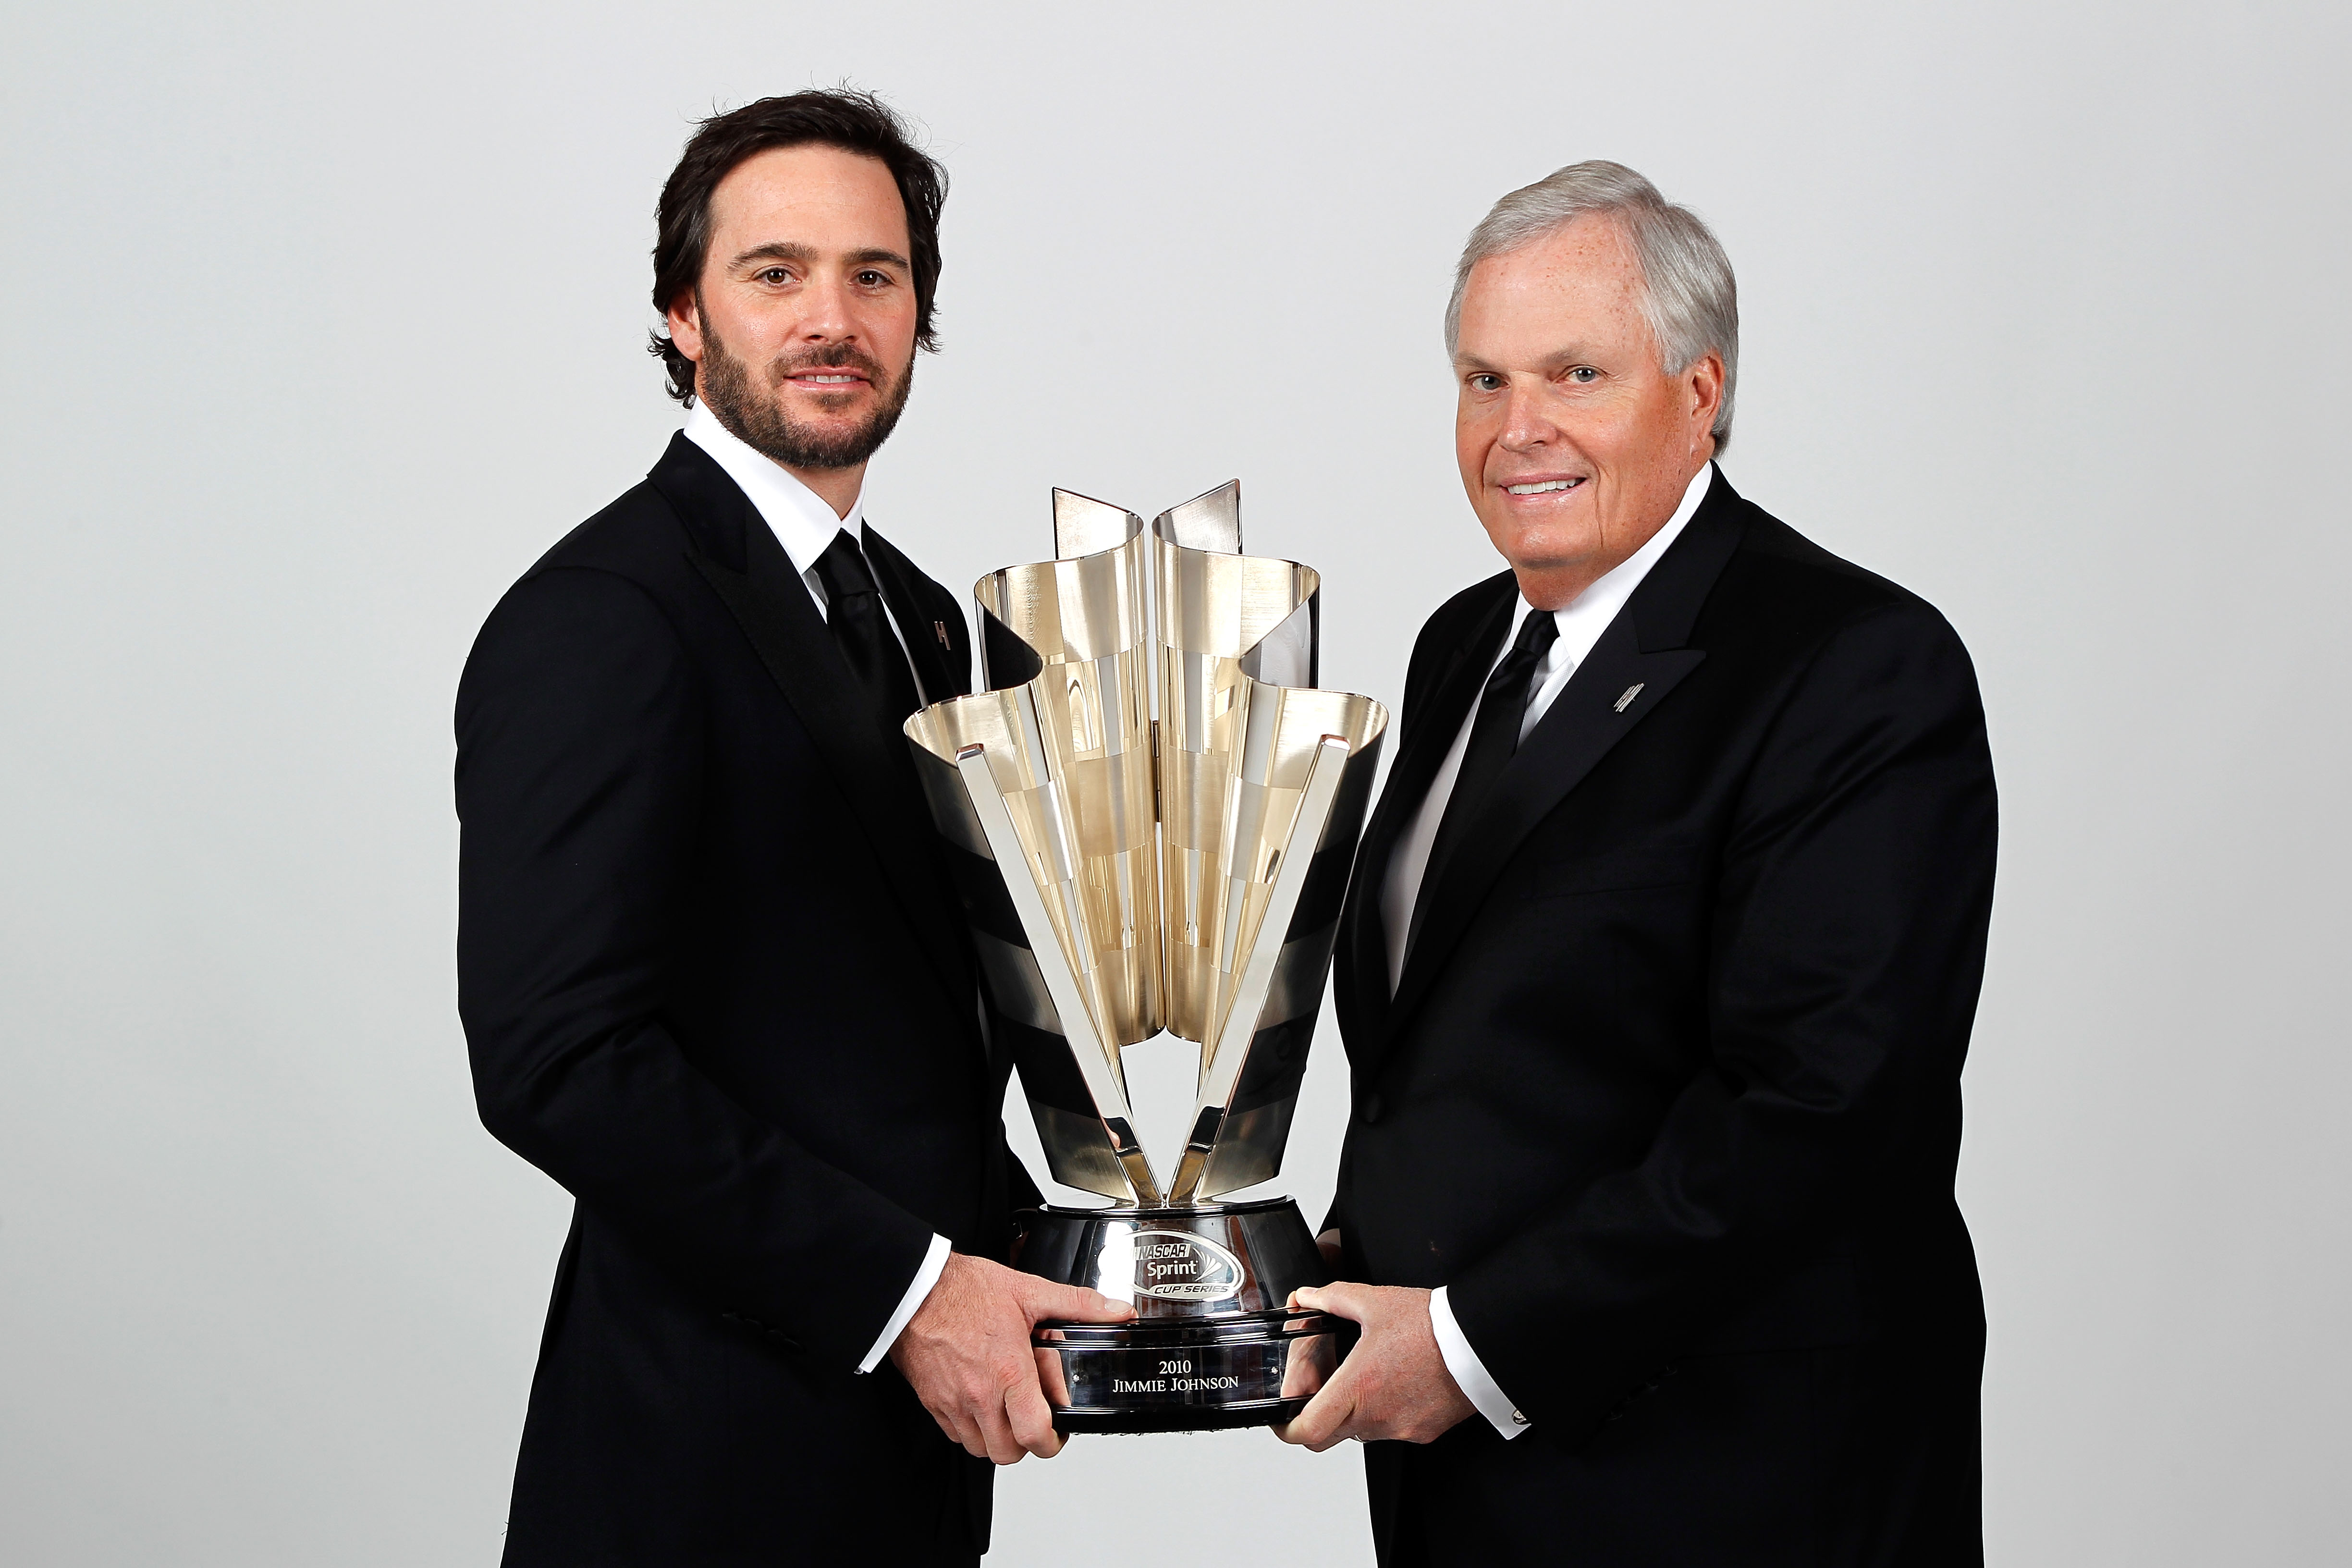 LAS VEGAS, NV - DECEMBER 03:  (L-R) Five-time champion Jimmie Johnson poses with team owner Rick Hendrick and the Sprint Cup trophy during the NASCAR Sprint Cup Series awards banquet at the Wynn Las Vegas Hotel on December 3, 2010 in Las Vegas, Nevada.  (